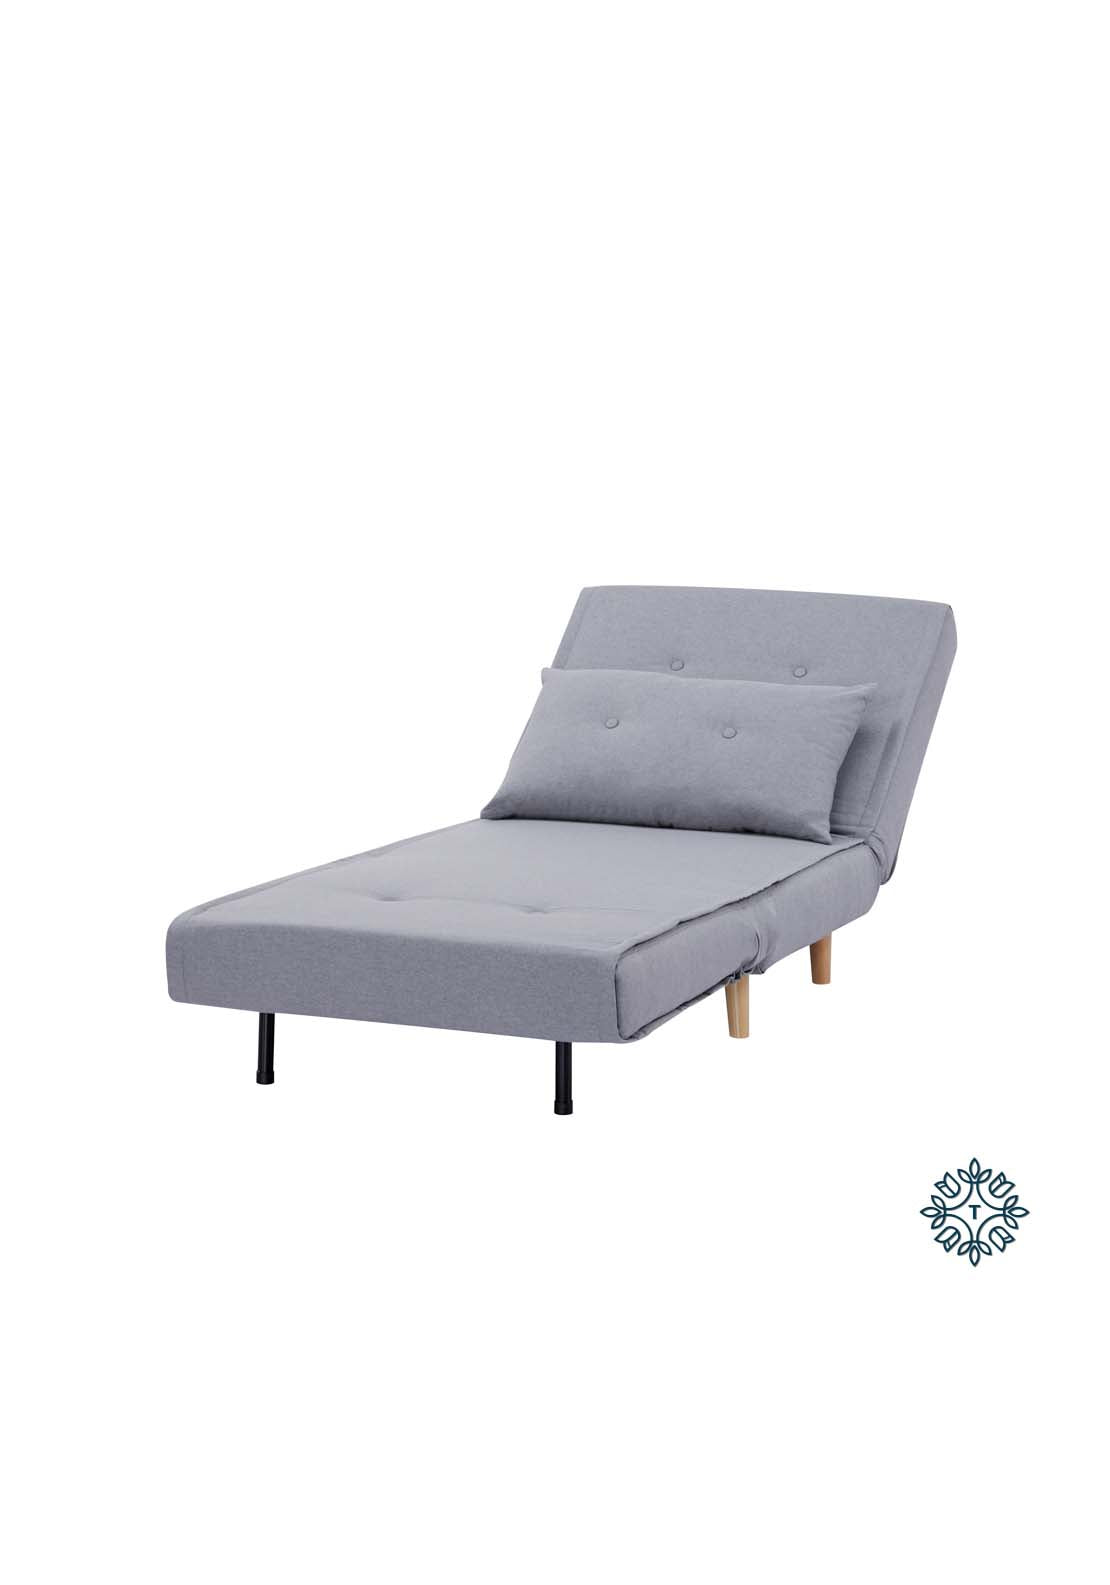 The Home Collection Haru Single Sofa Bed - Grey 3 Shaws Department Stores